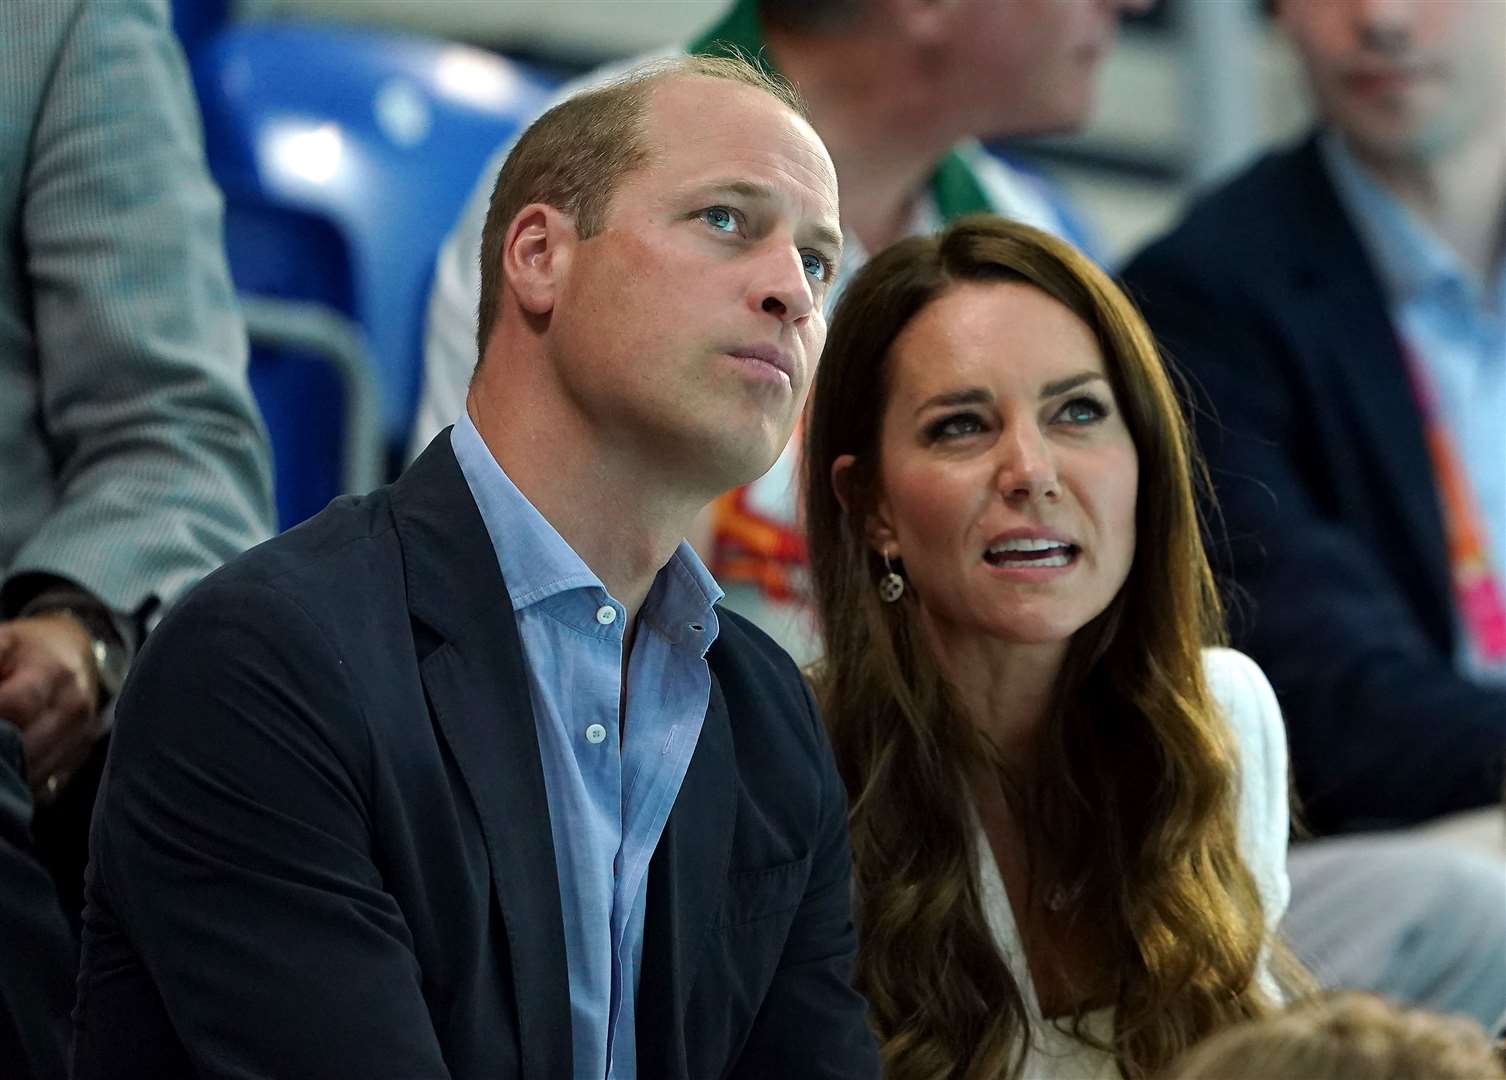 The Duke and Duchess of Cambridge at the Commonwealth Games (Zac Goodwin/PA)